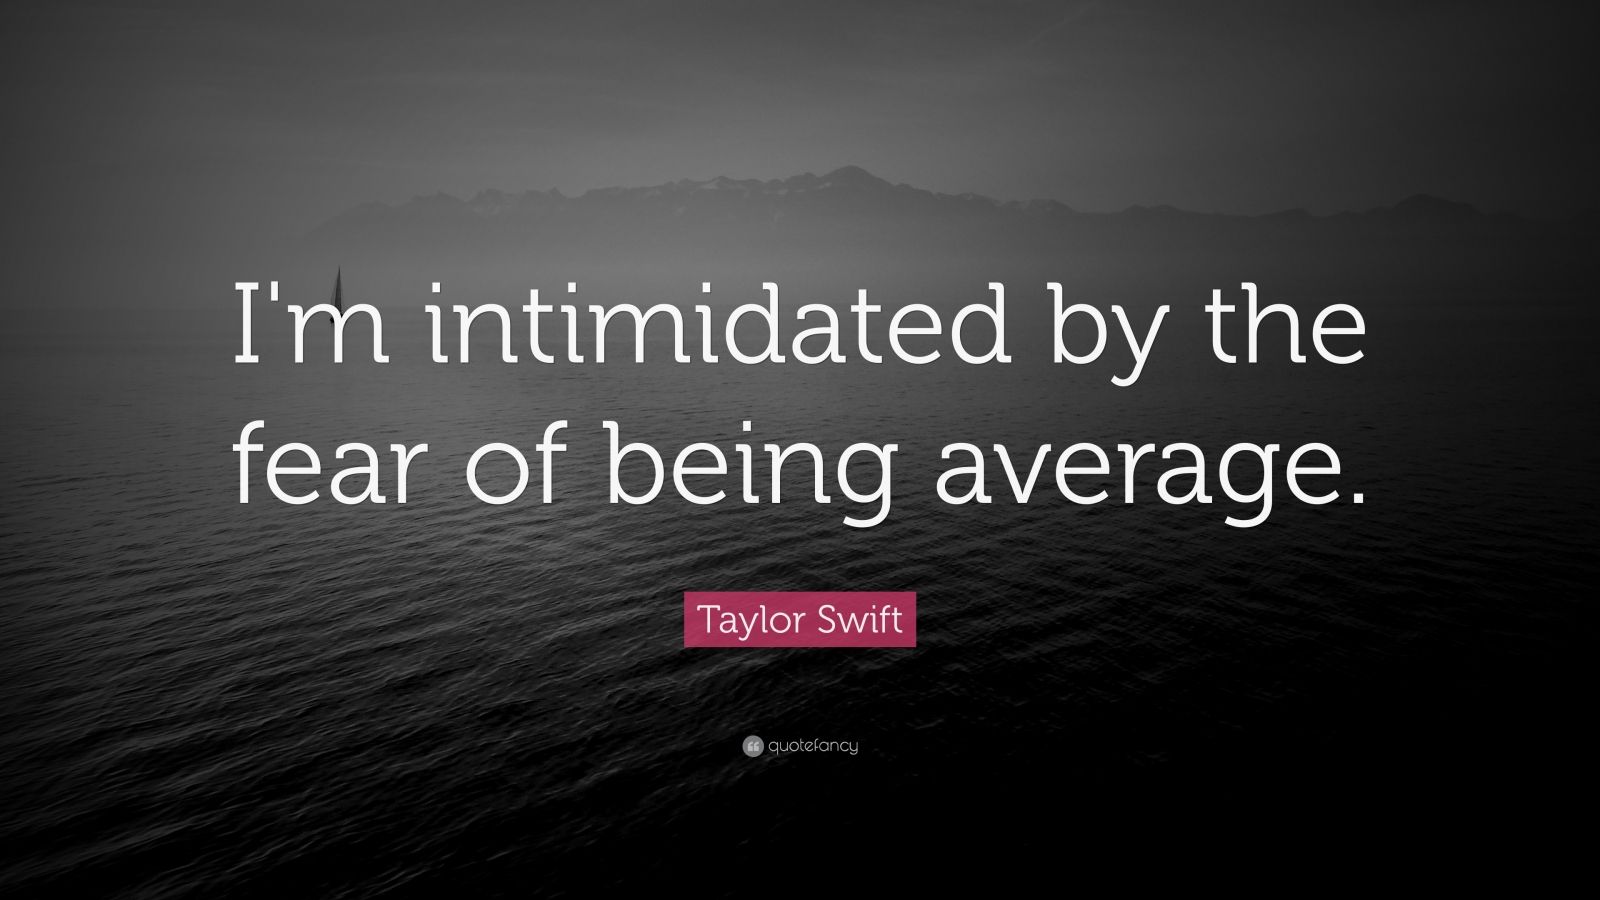 Taylor Swift Quote “I'm intimidated by the fear of being average.” (15